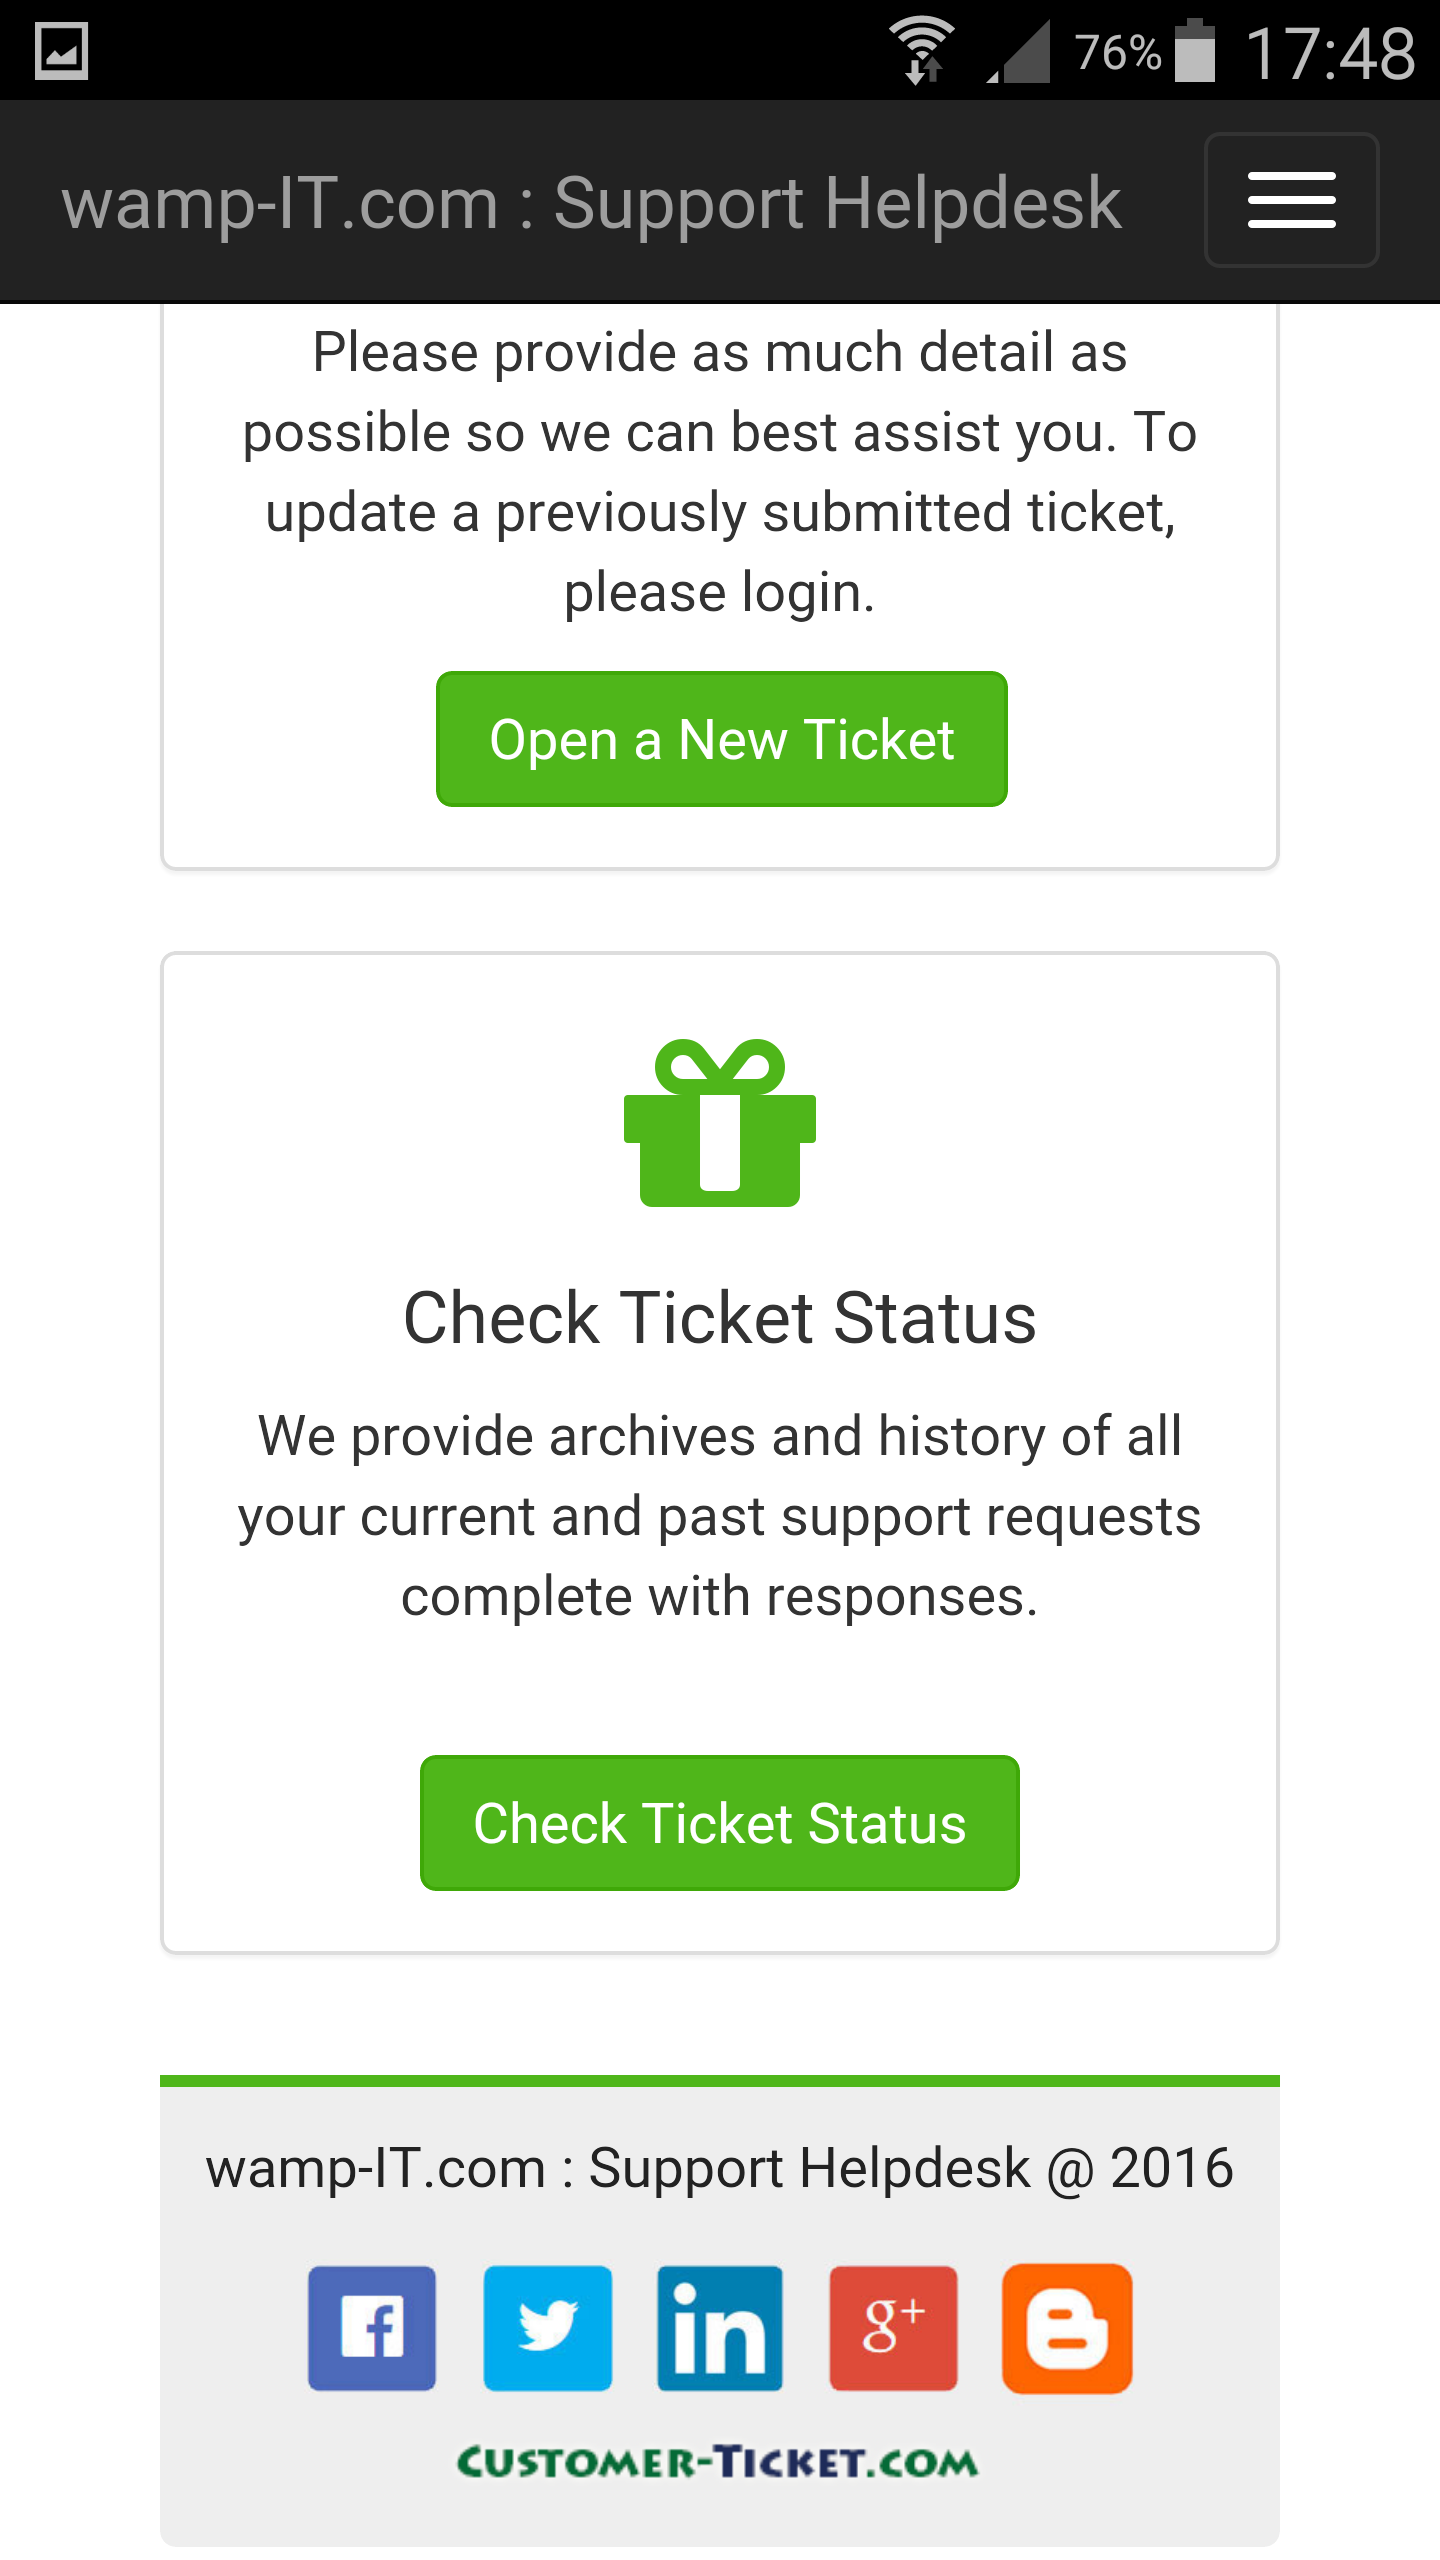 ticket helpdesk responsive web, design theme 1 in mobile view